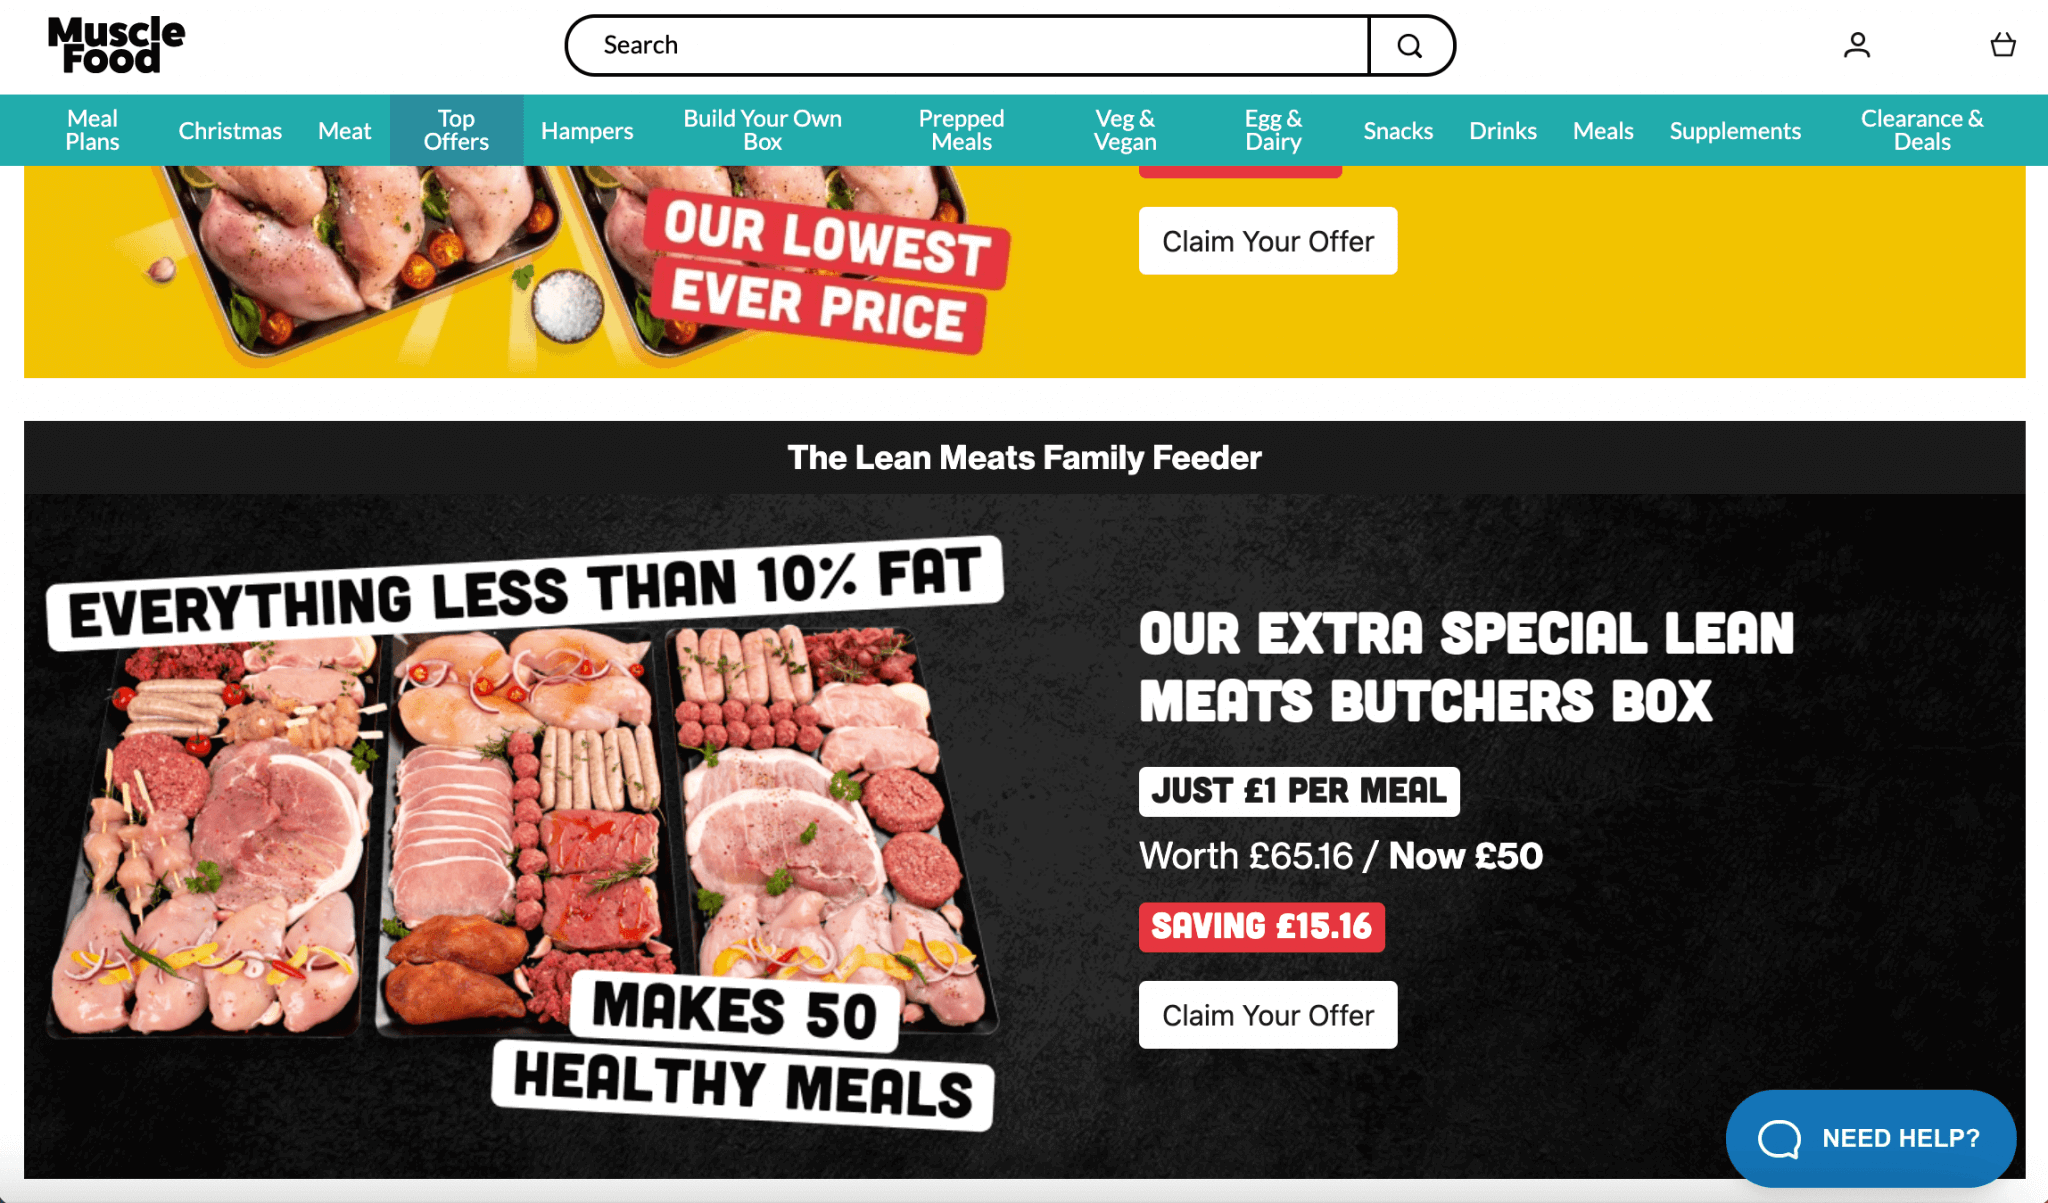 MuscleFood Offer